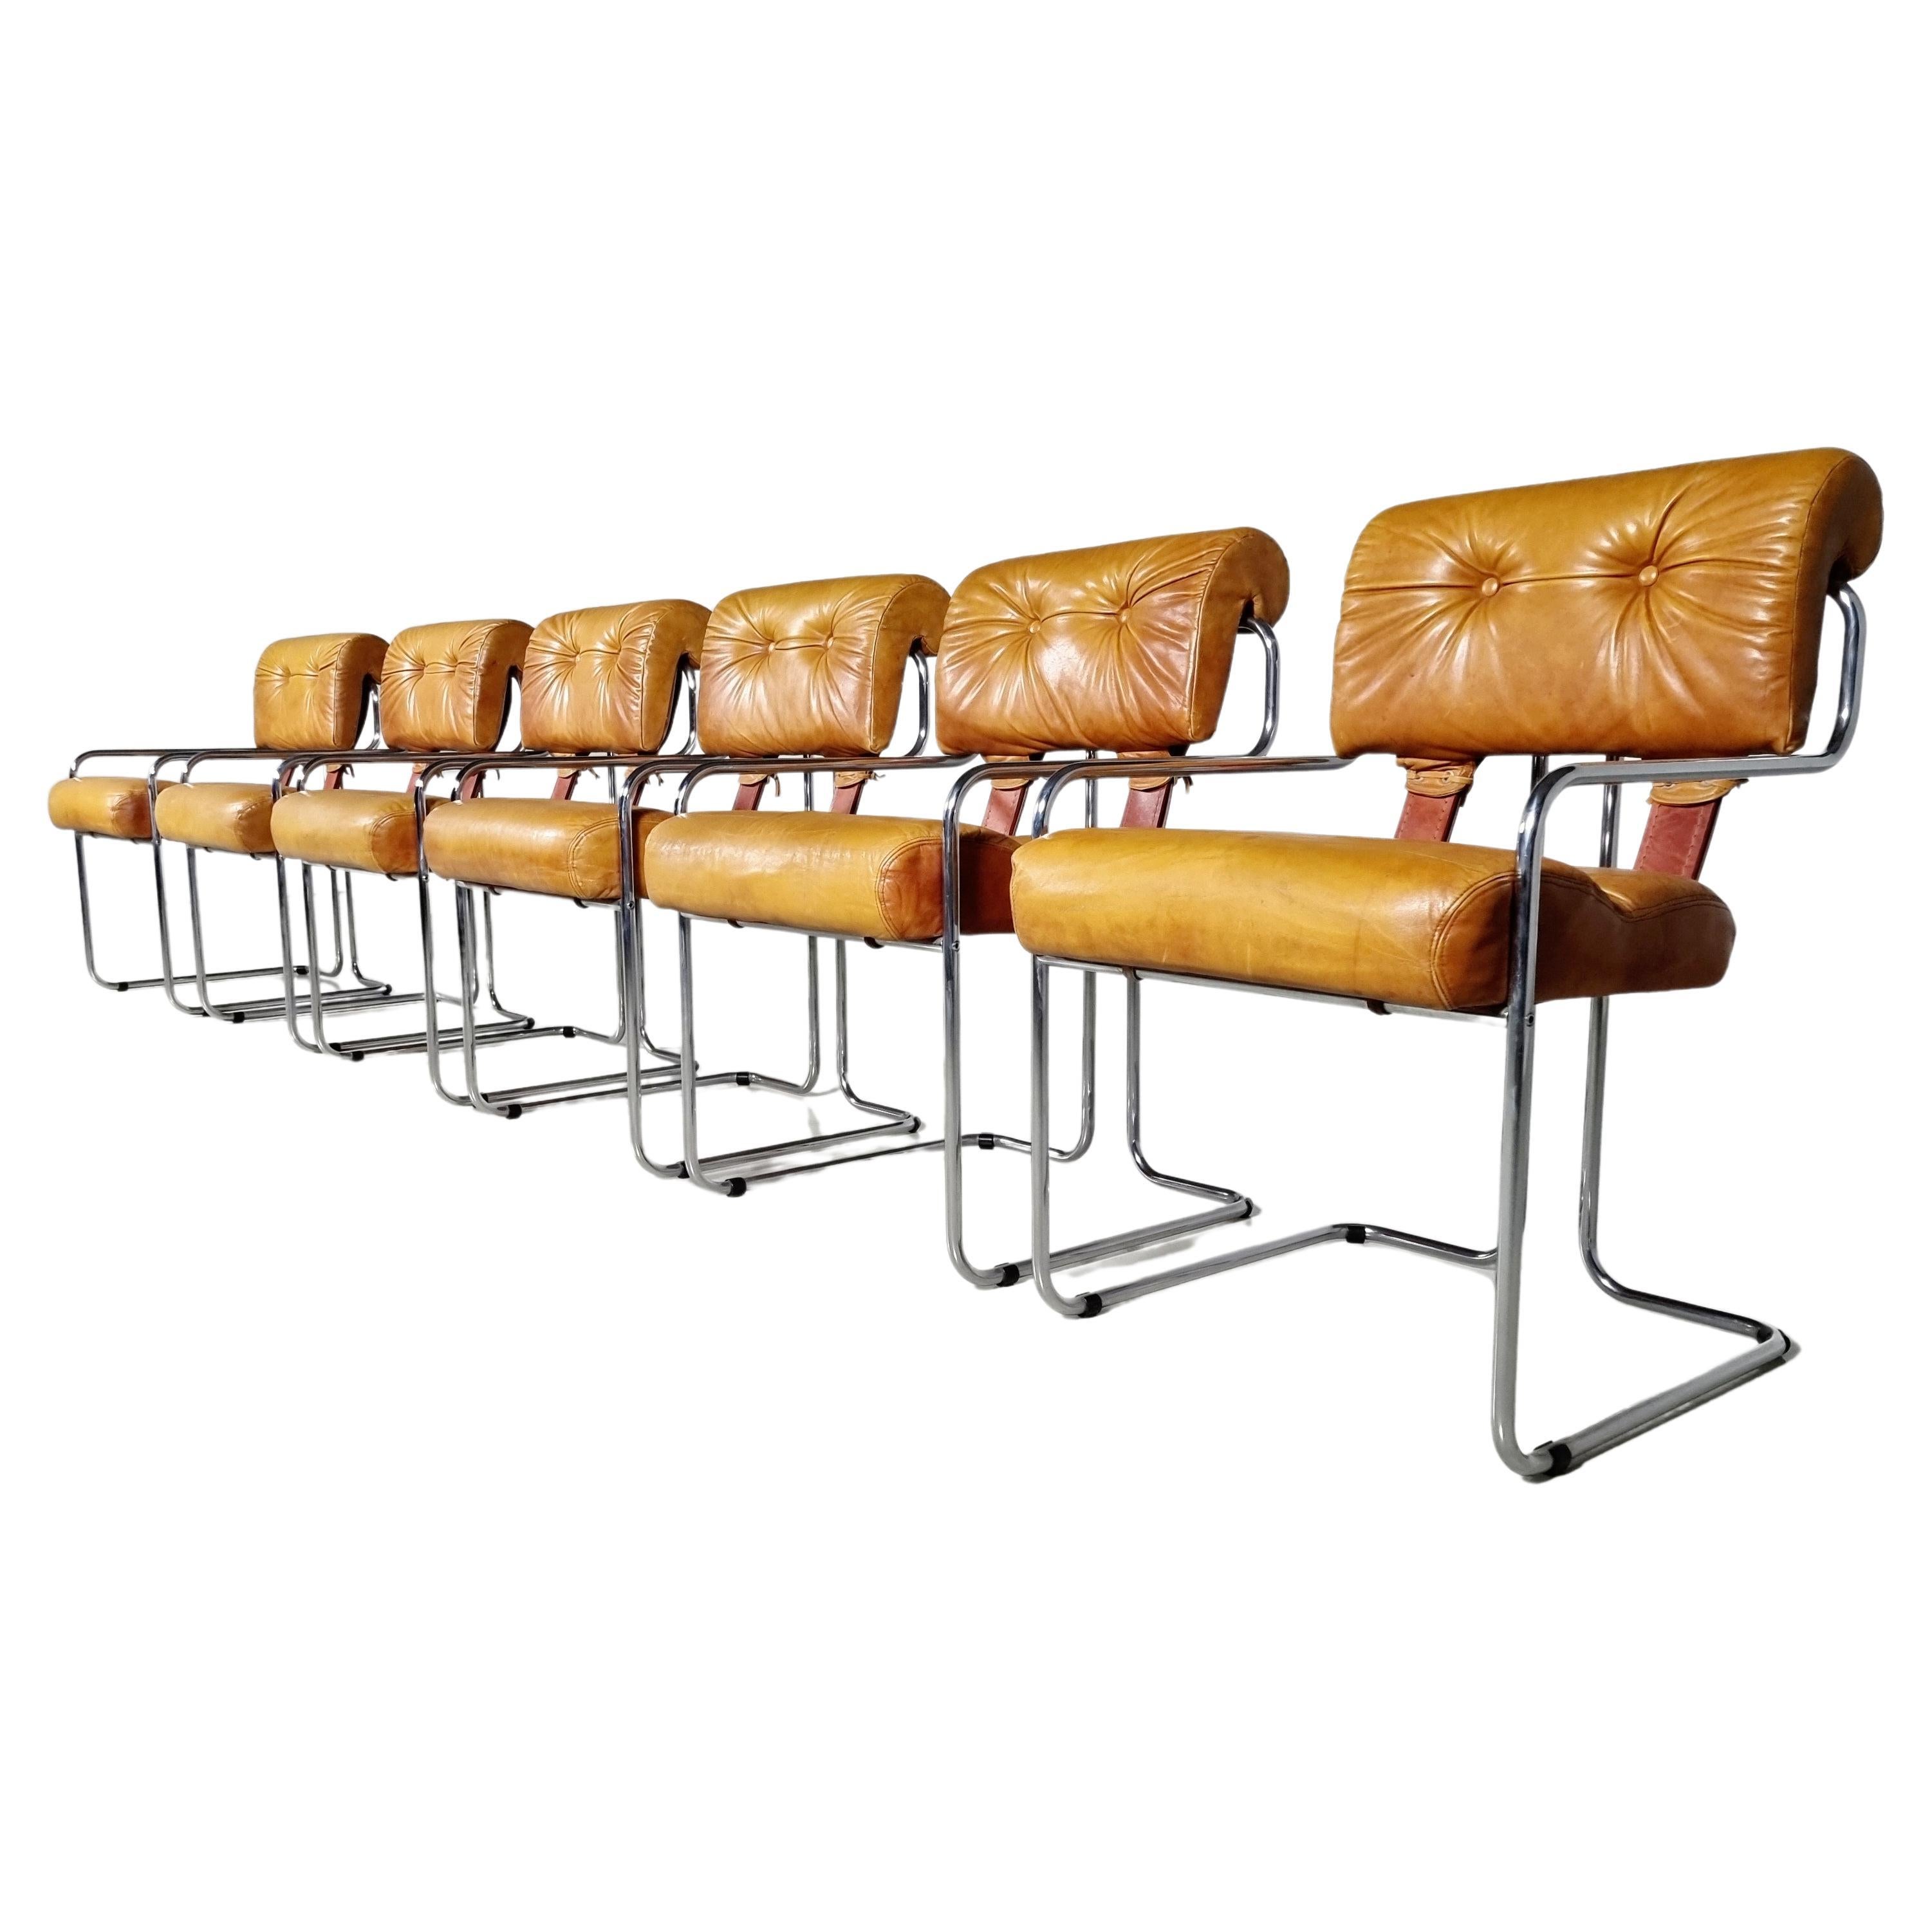 Tucroma Chairs by Guido Faleschini for I4 Mariani, 1970s, Set of 6